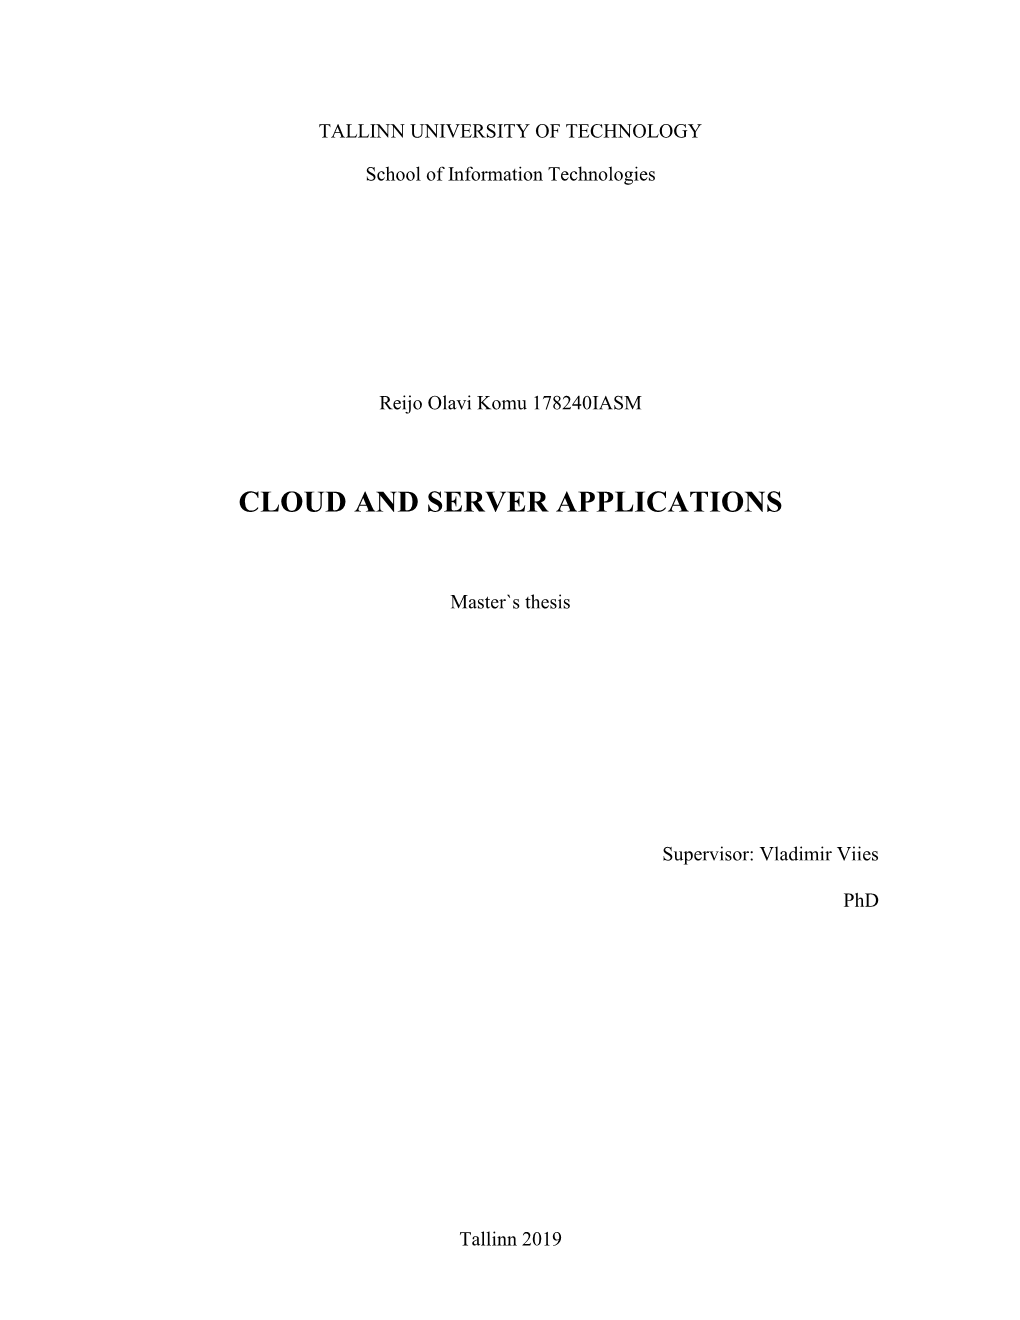 Cloud and Server Applications